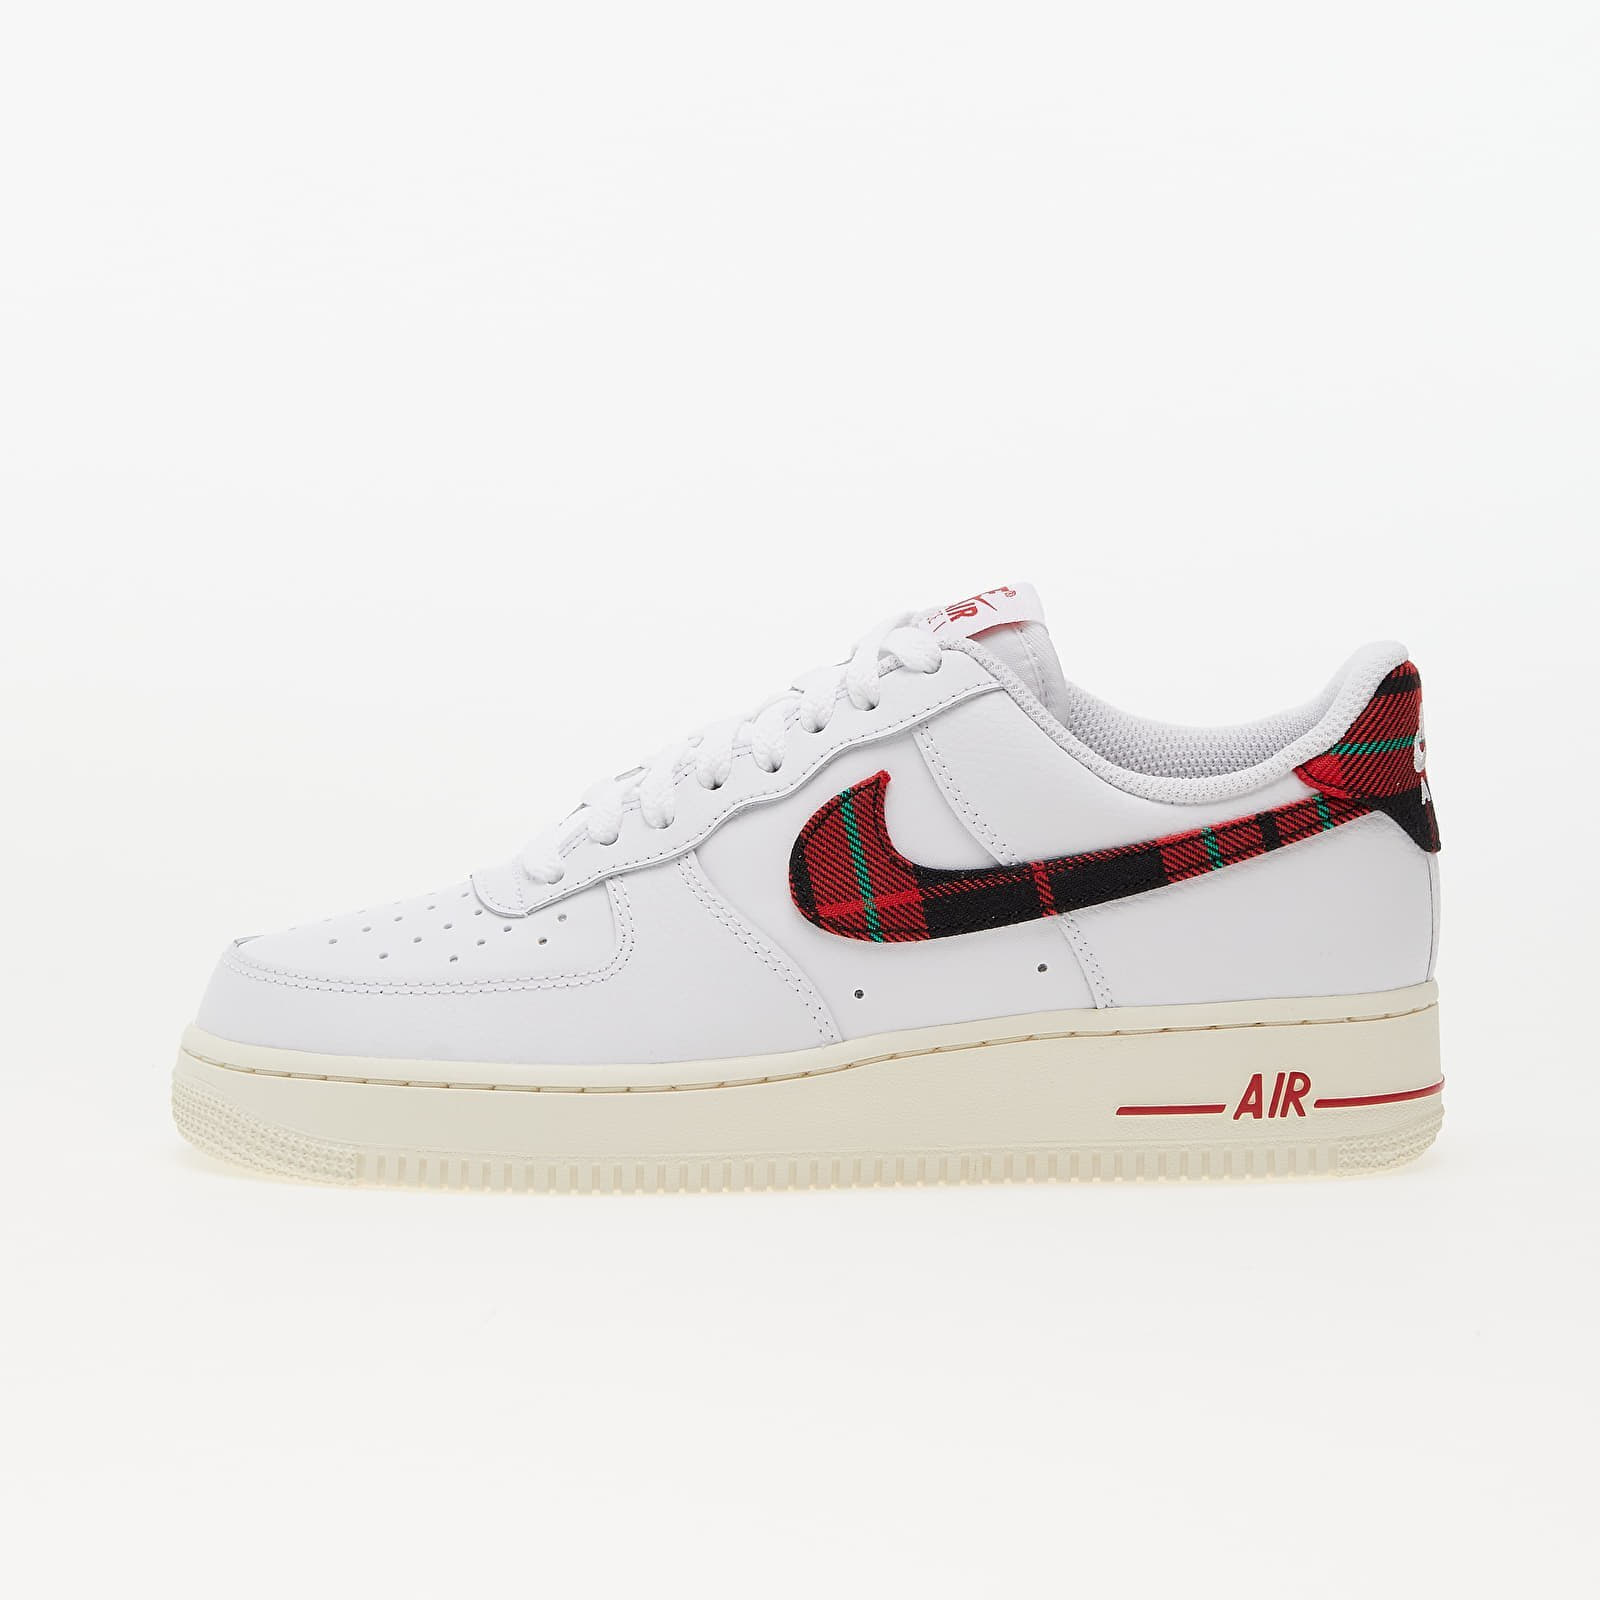 Men's sneakers and shoes Nike Air Force 1 '07 LV8 White/ University Red-Stadium Green